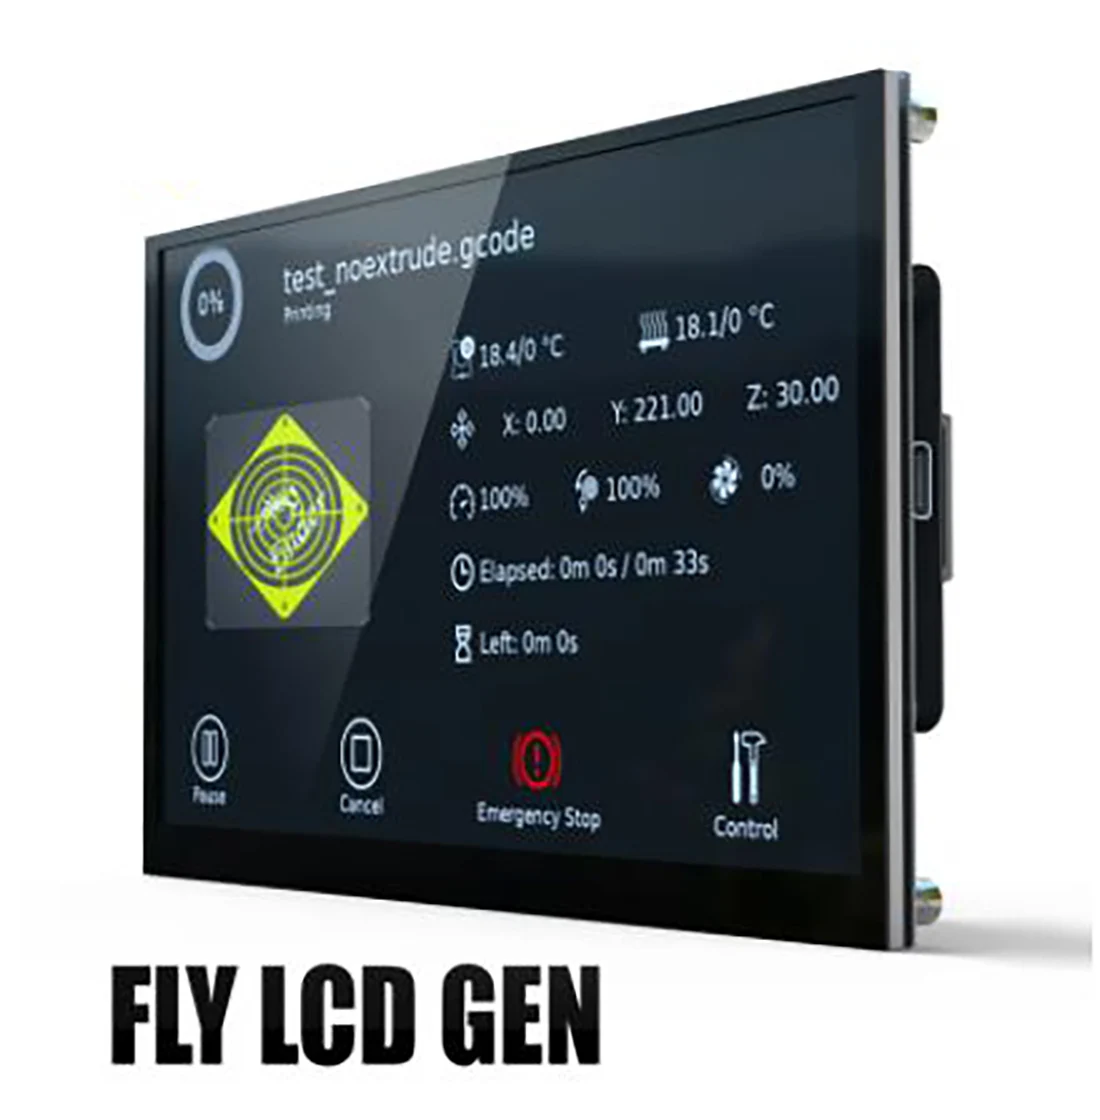 

FLY LCD43 LCD50 LCD70 LCD Display Touch Screen Replaceable Core DIS/Hdmi 3D Printer Parts For Raspberry Pi 4 3B Plus 2B